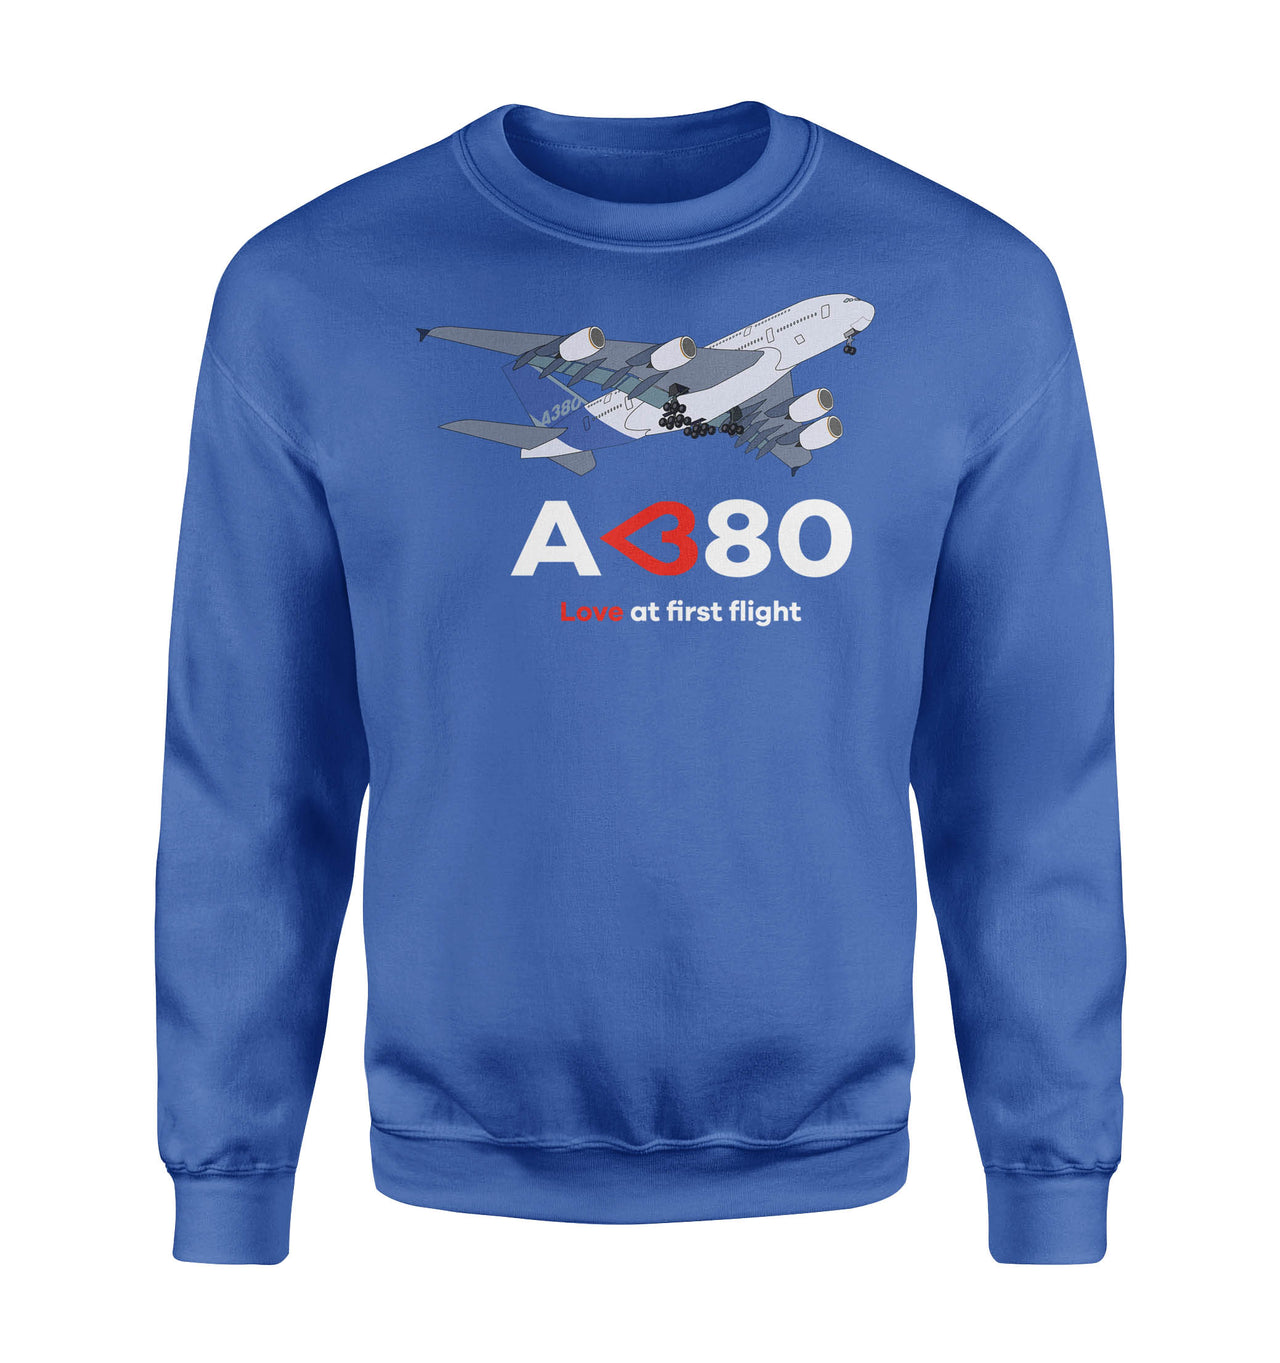 Airbus A380 Love at first flight Designed Sweatshirts